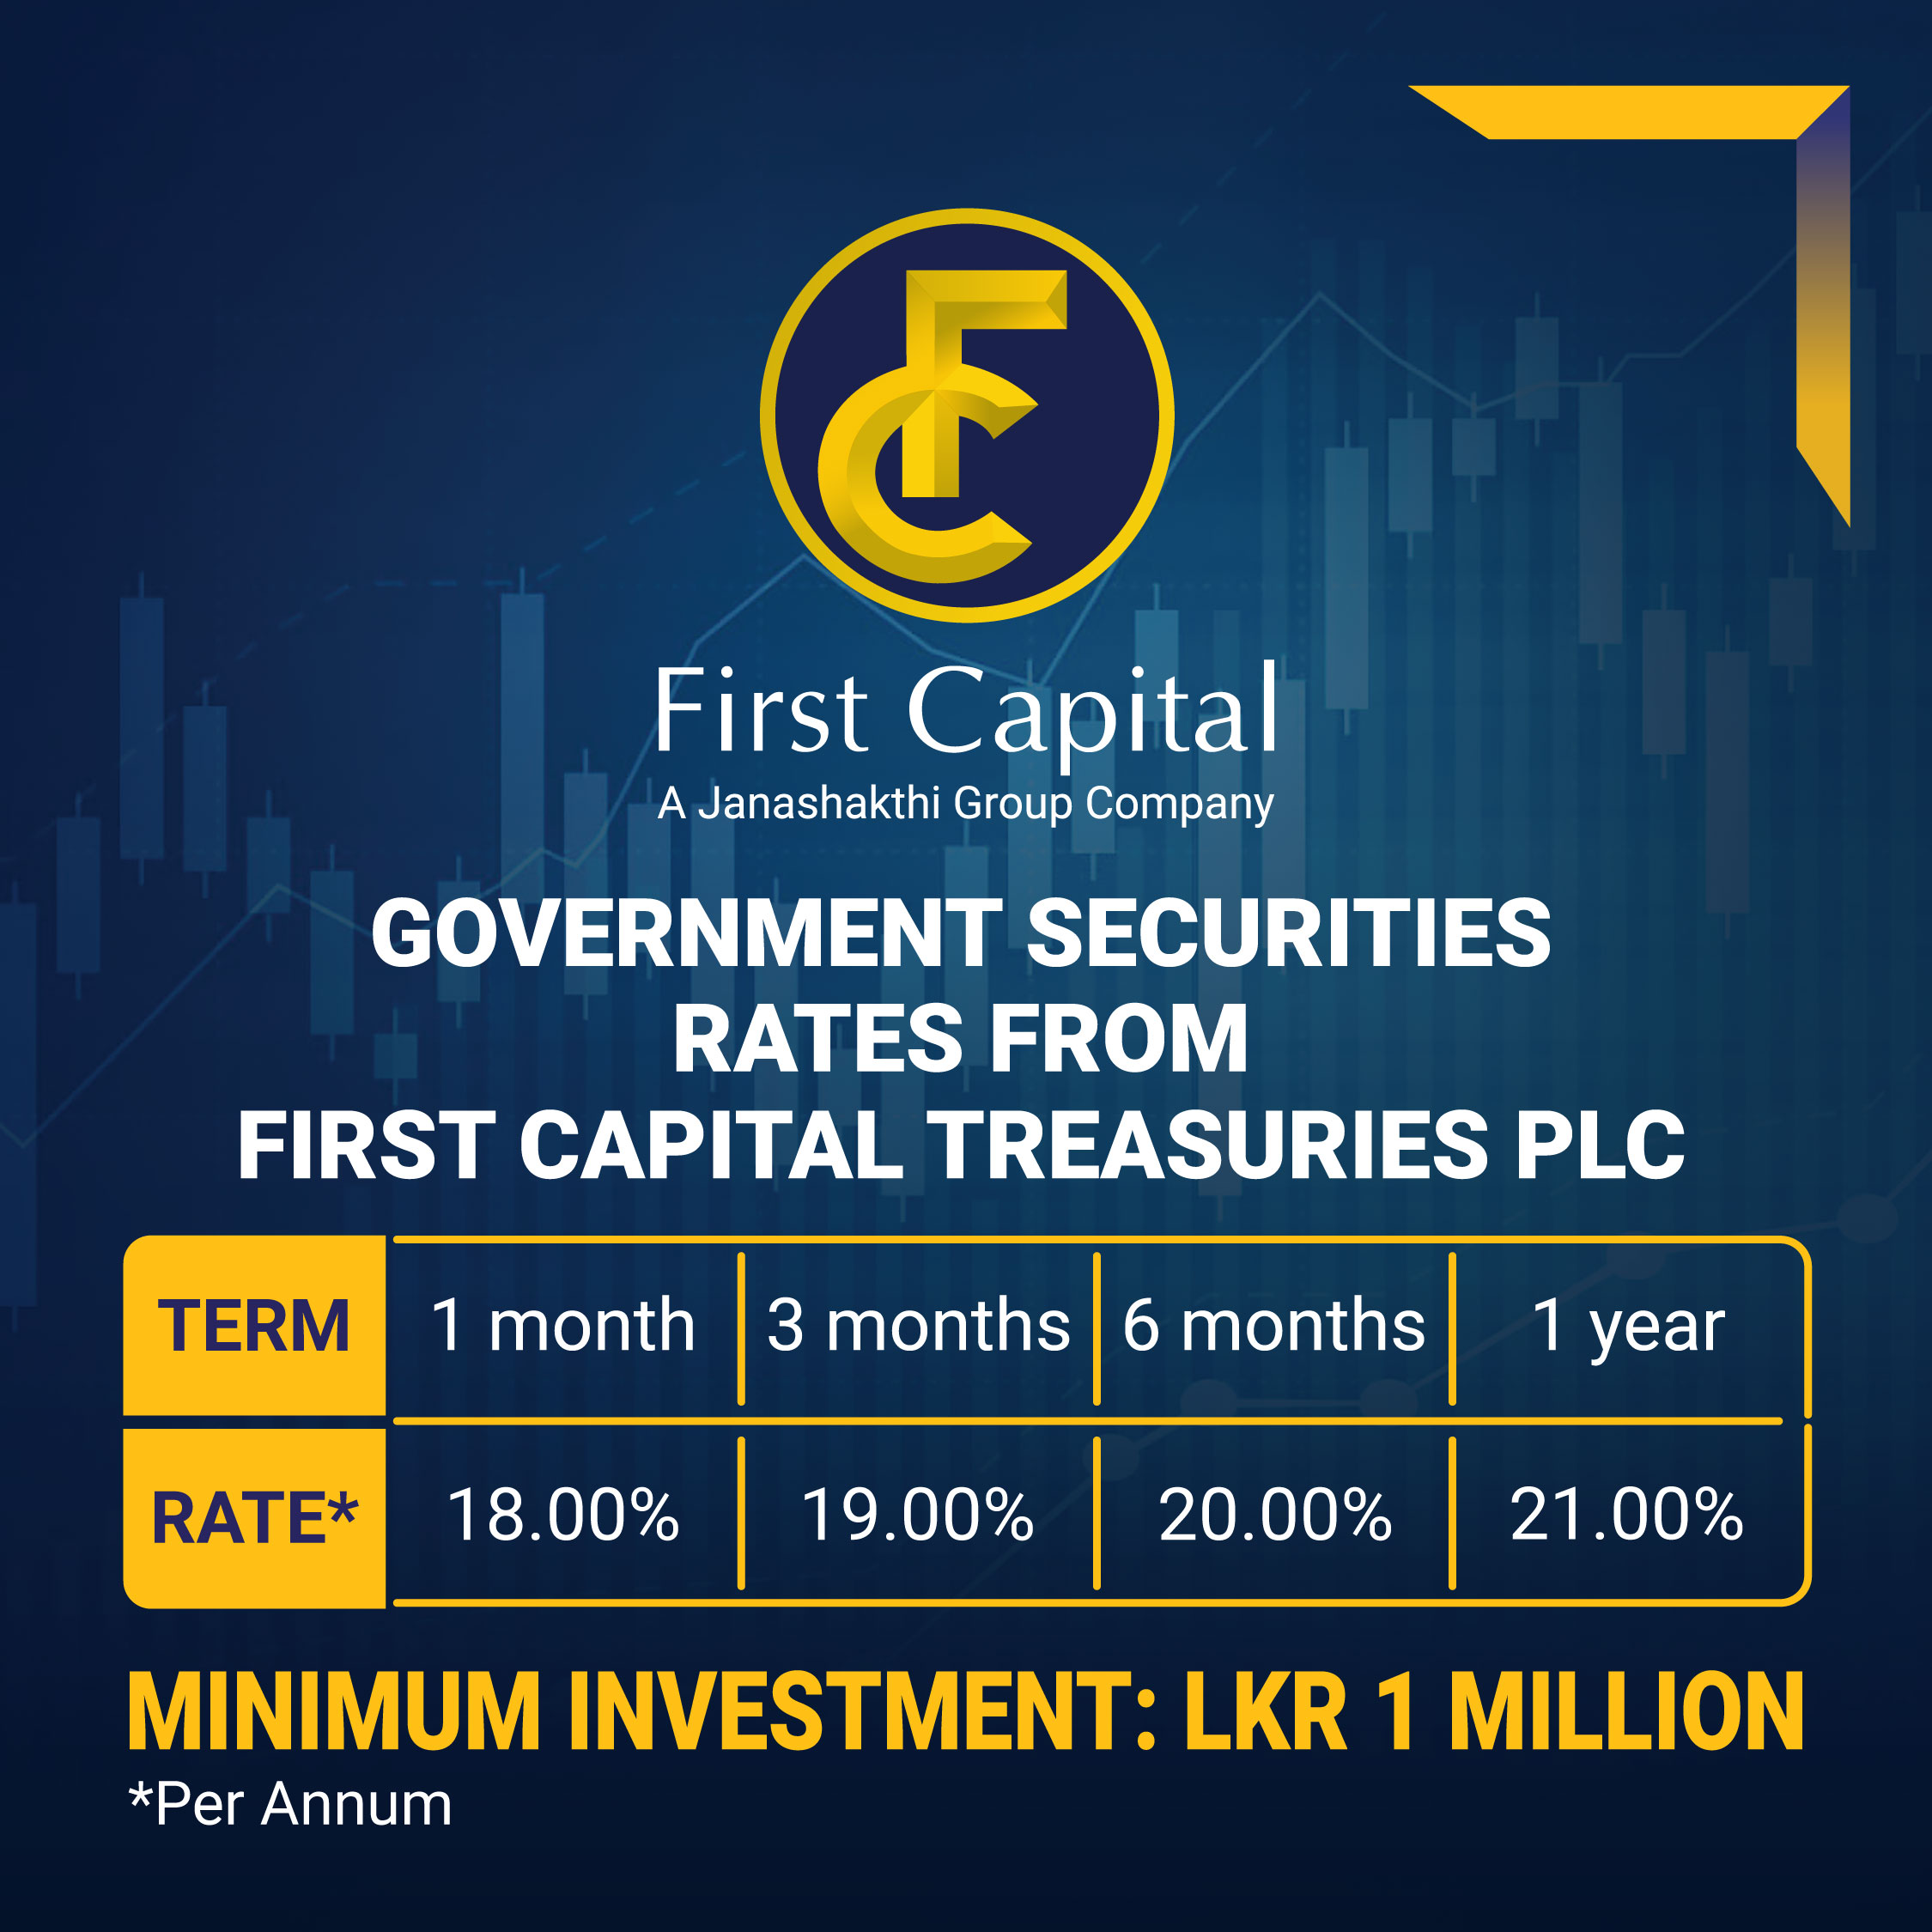 Government Securities Rates from First Capital Treasuries PLC 10 June 22